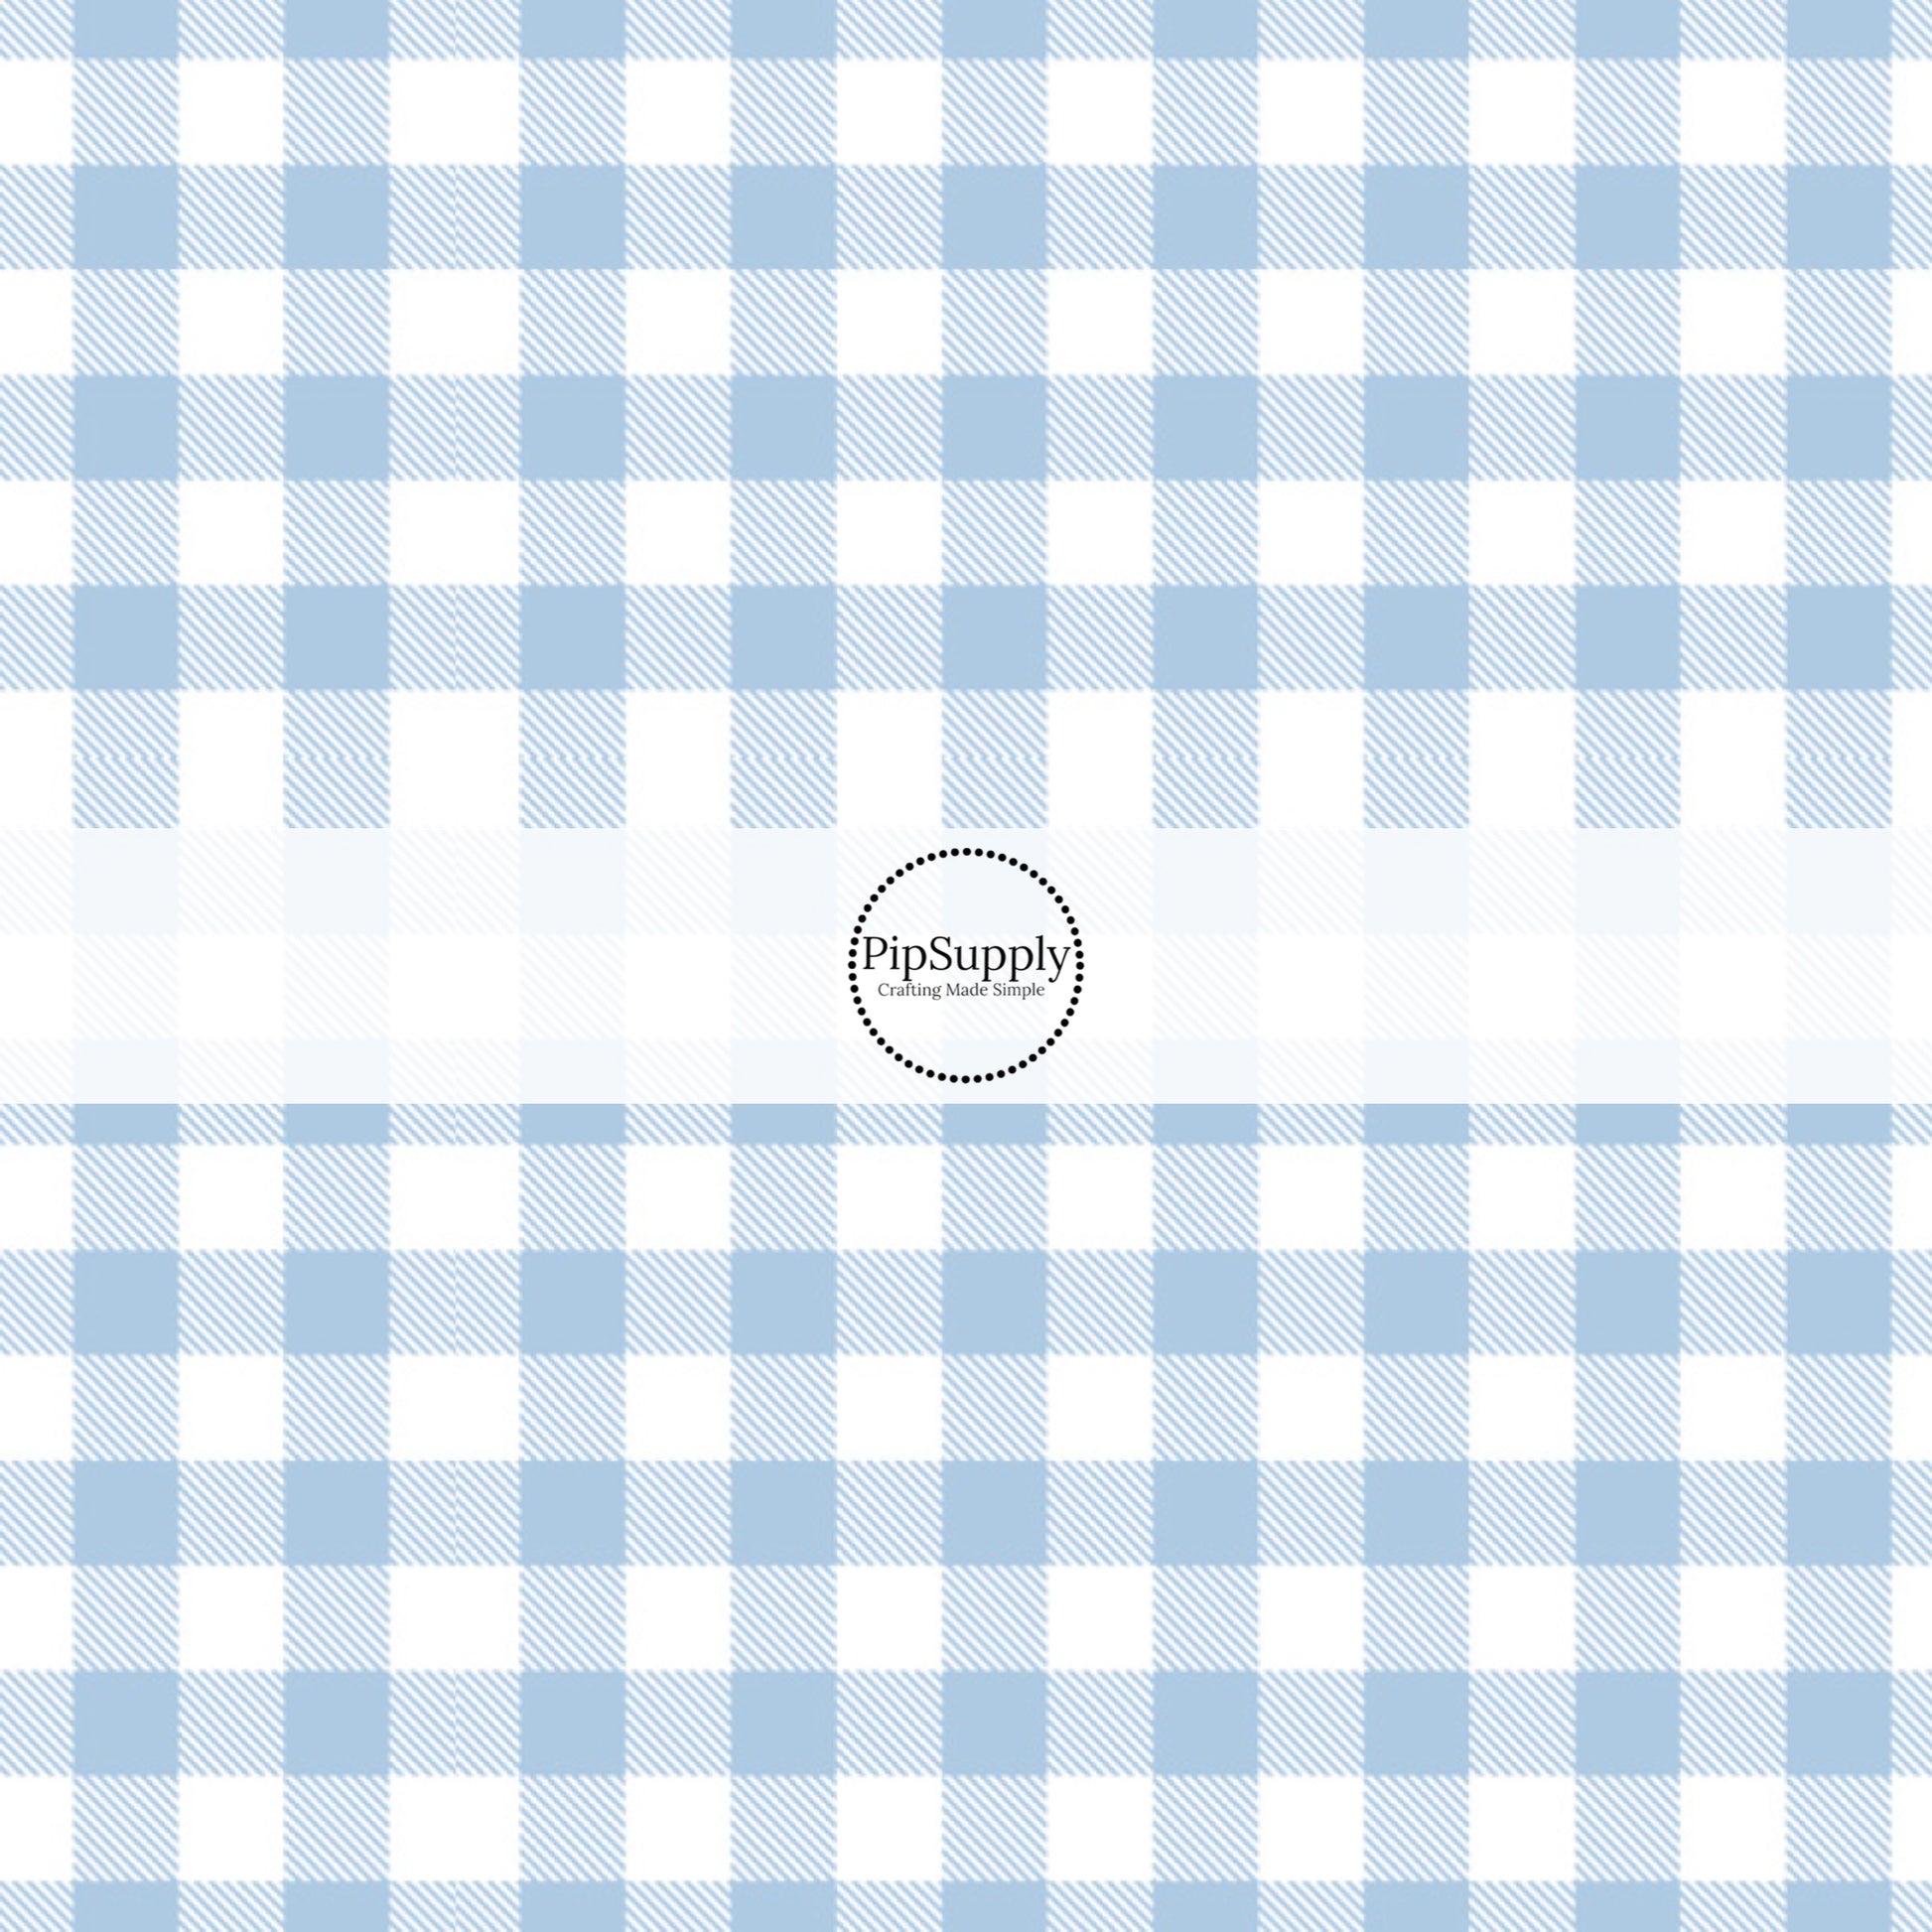 NEW! Create It: Iron-on Fabric Sheets (Plaid)